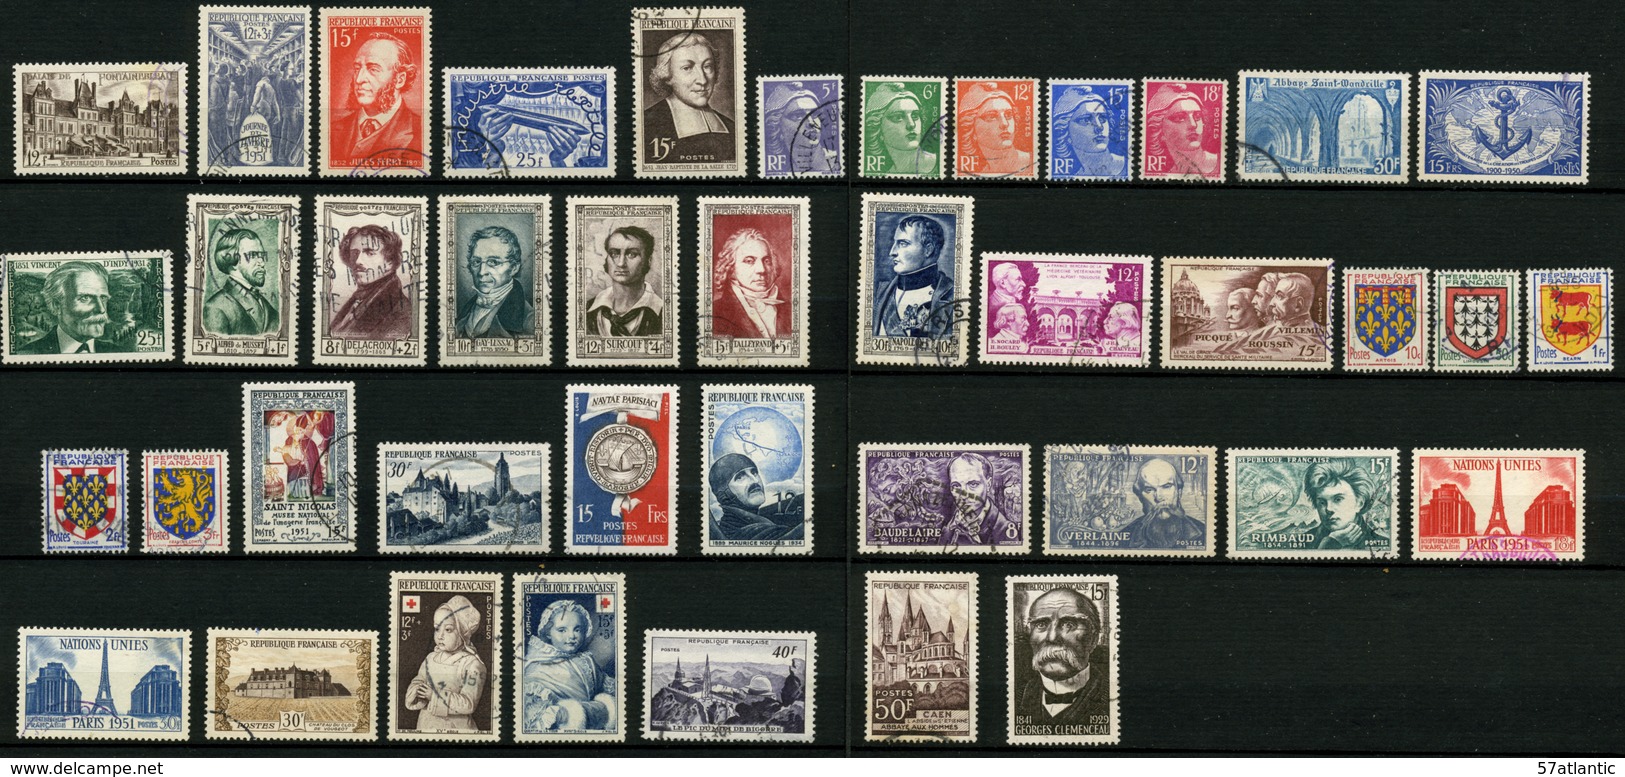 FRANCE - ANNEE COMPLETE 1951 - YT 878 à 918 - 41 TIMBRES OBLITERES - 1950-1959